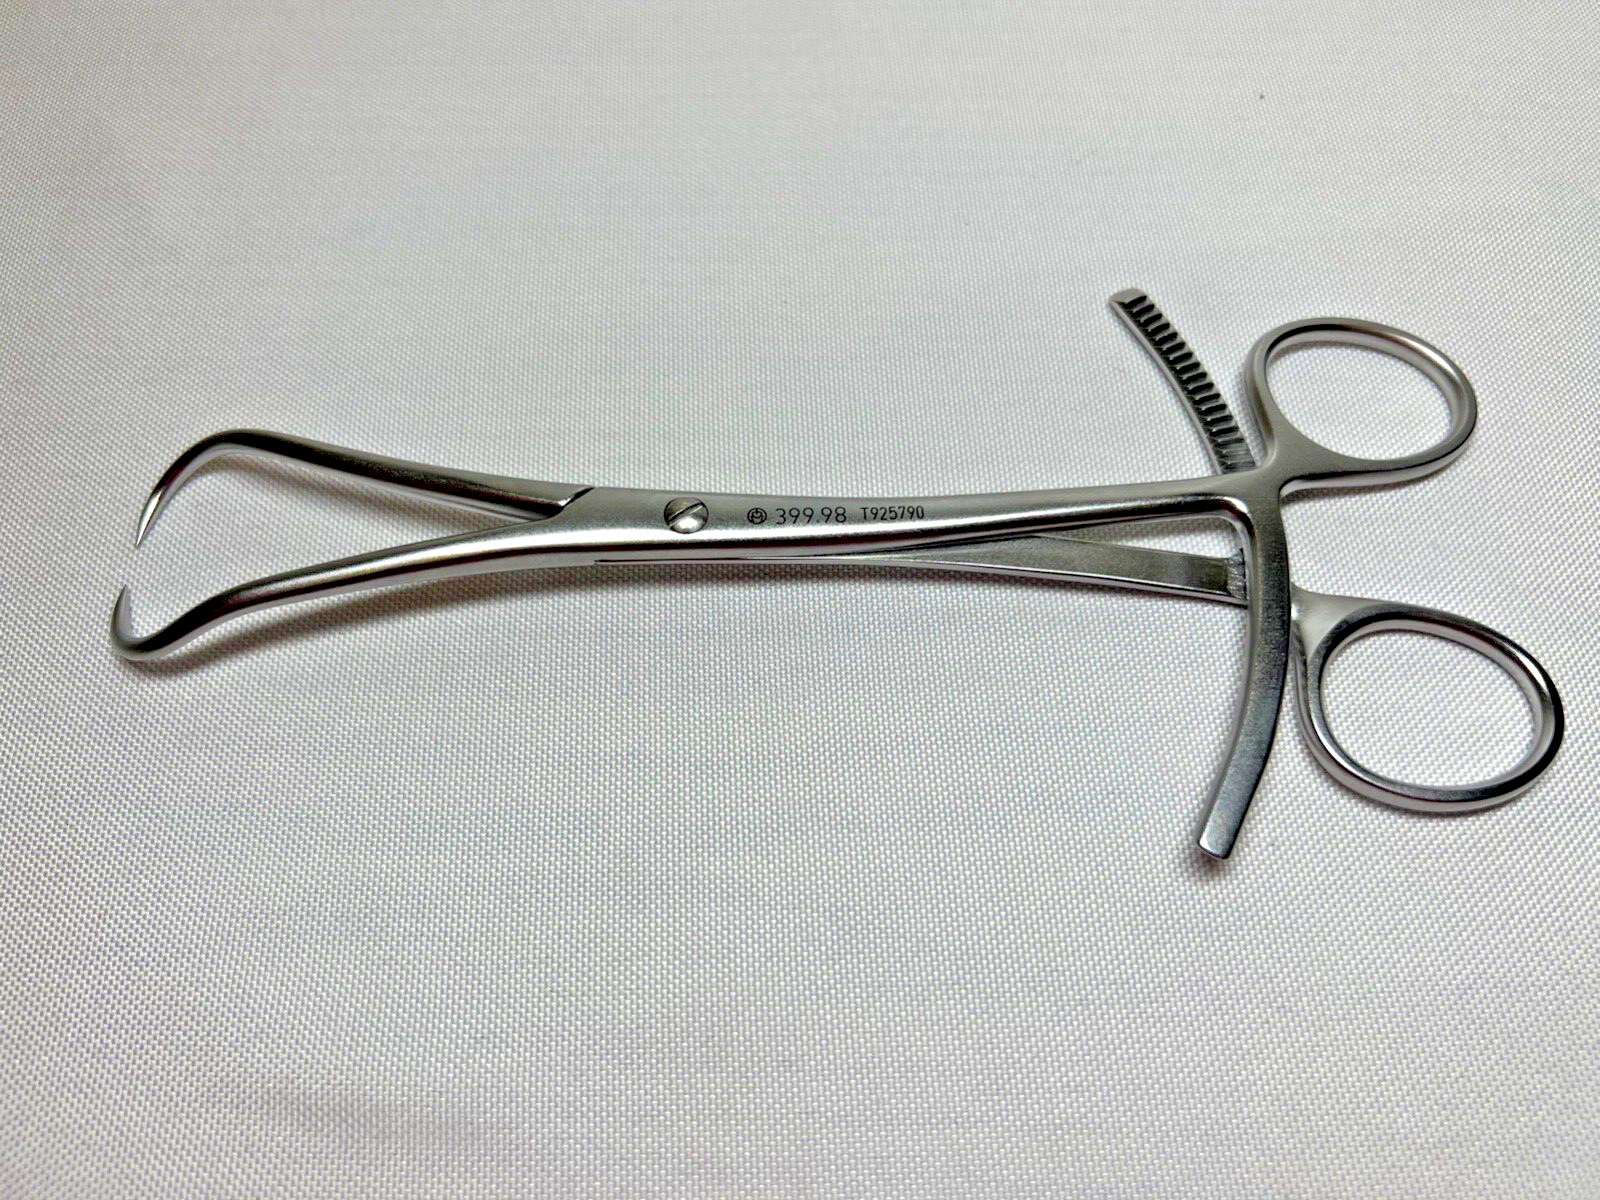 Synthes 399.98 Reduction Forceps w/ Points & Ratchet US1040